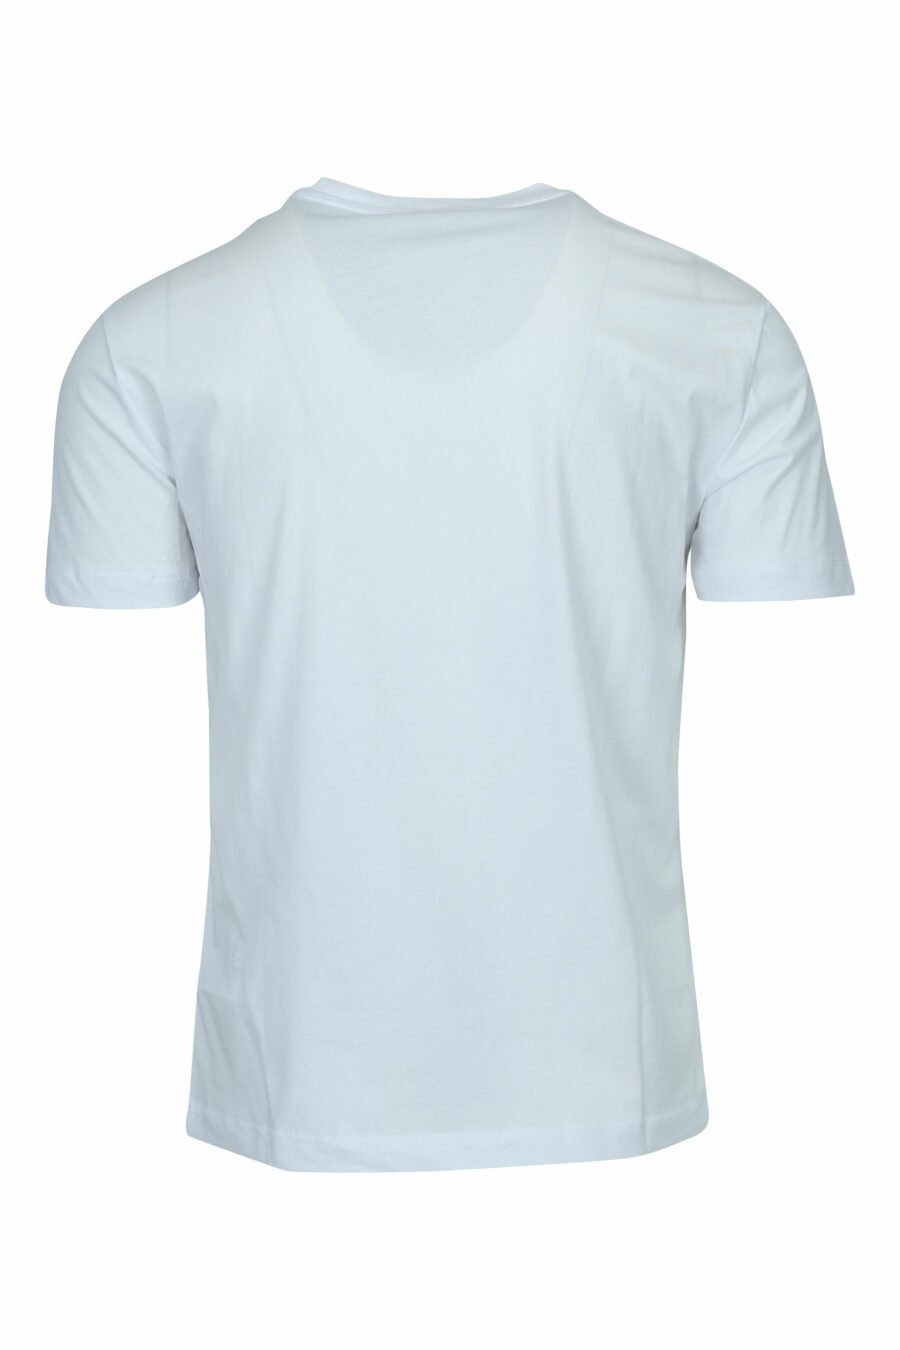 White T-shirt with "lux identity" maxilogo in gradient - 8057970673118 1